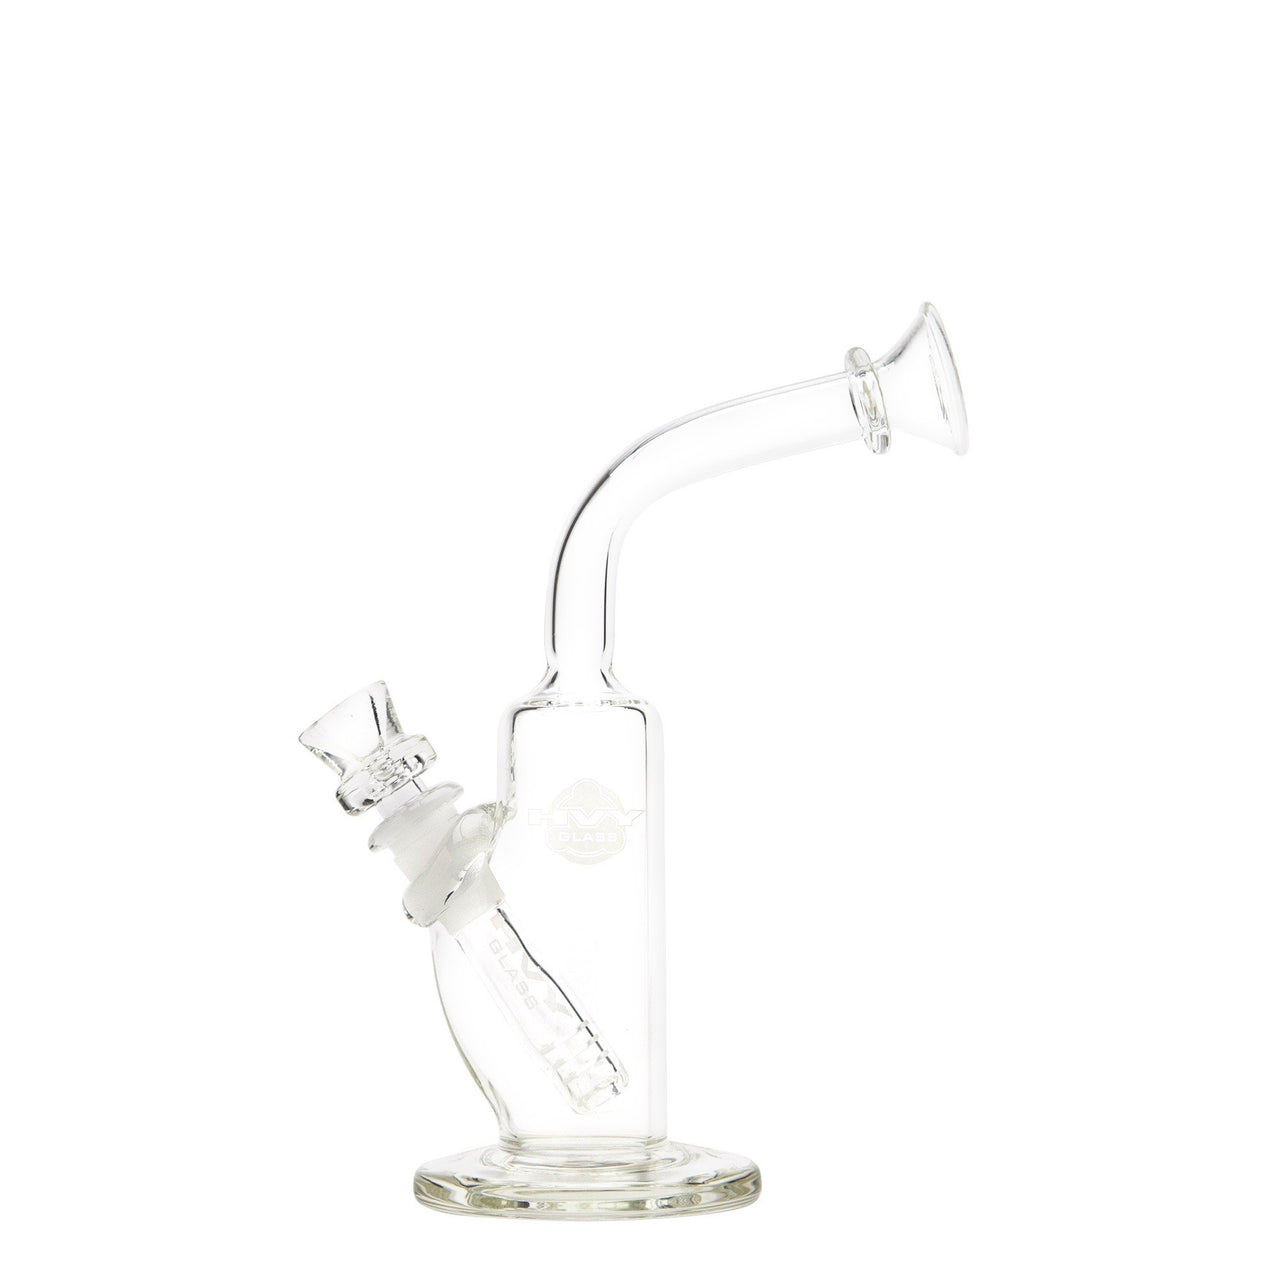 HVY 7in Bubbler - 420 Science - The most trusted online smoke shop.